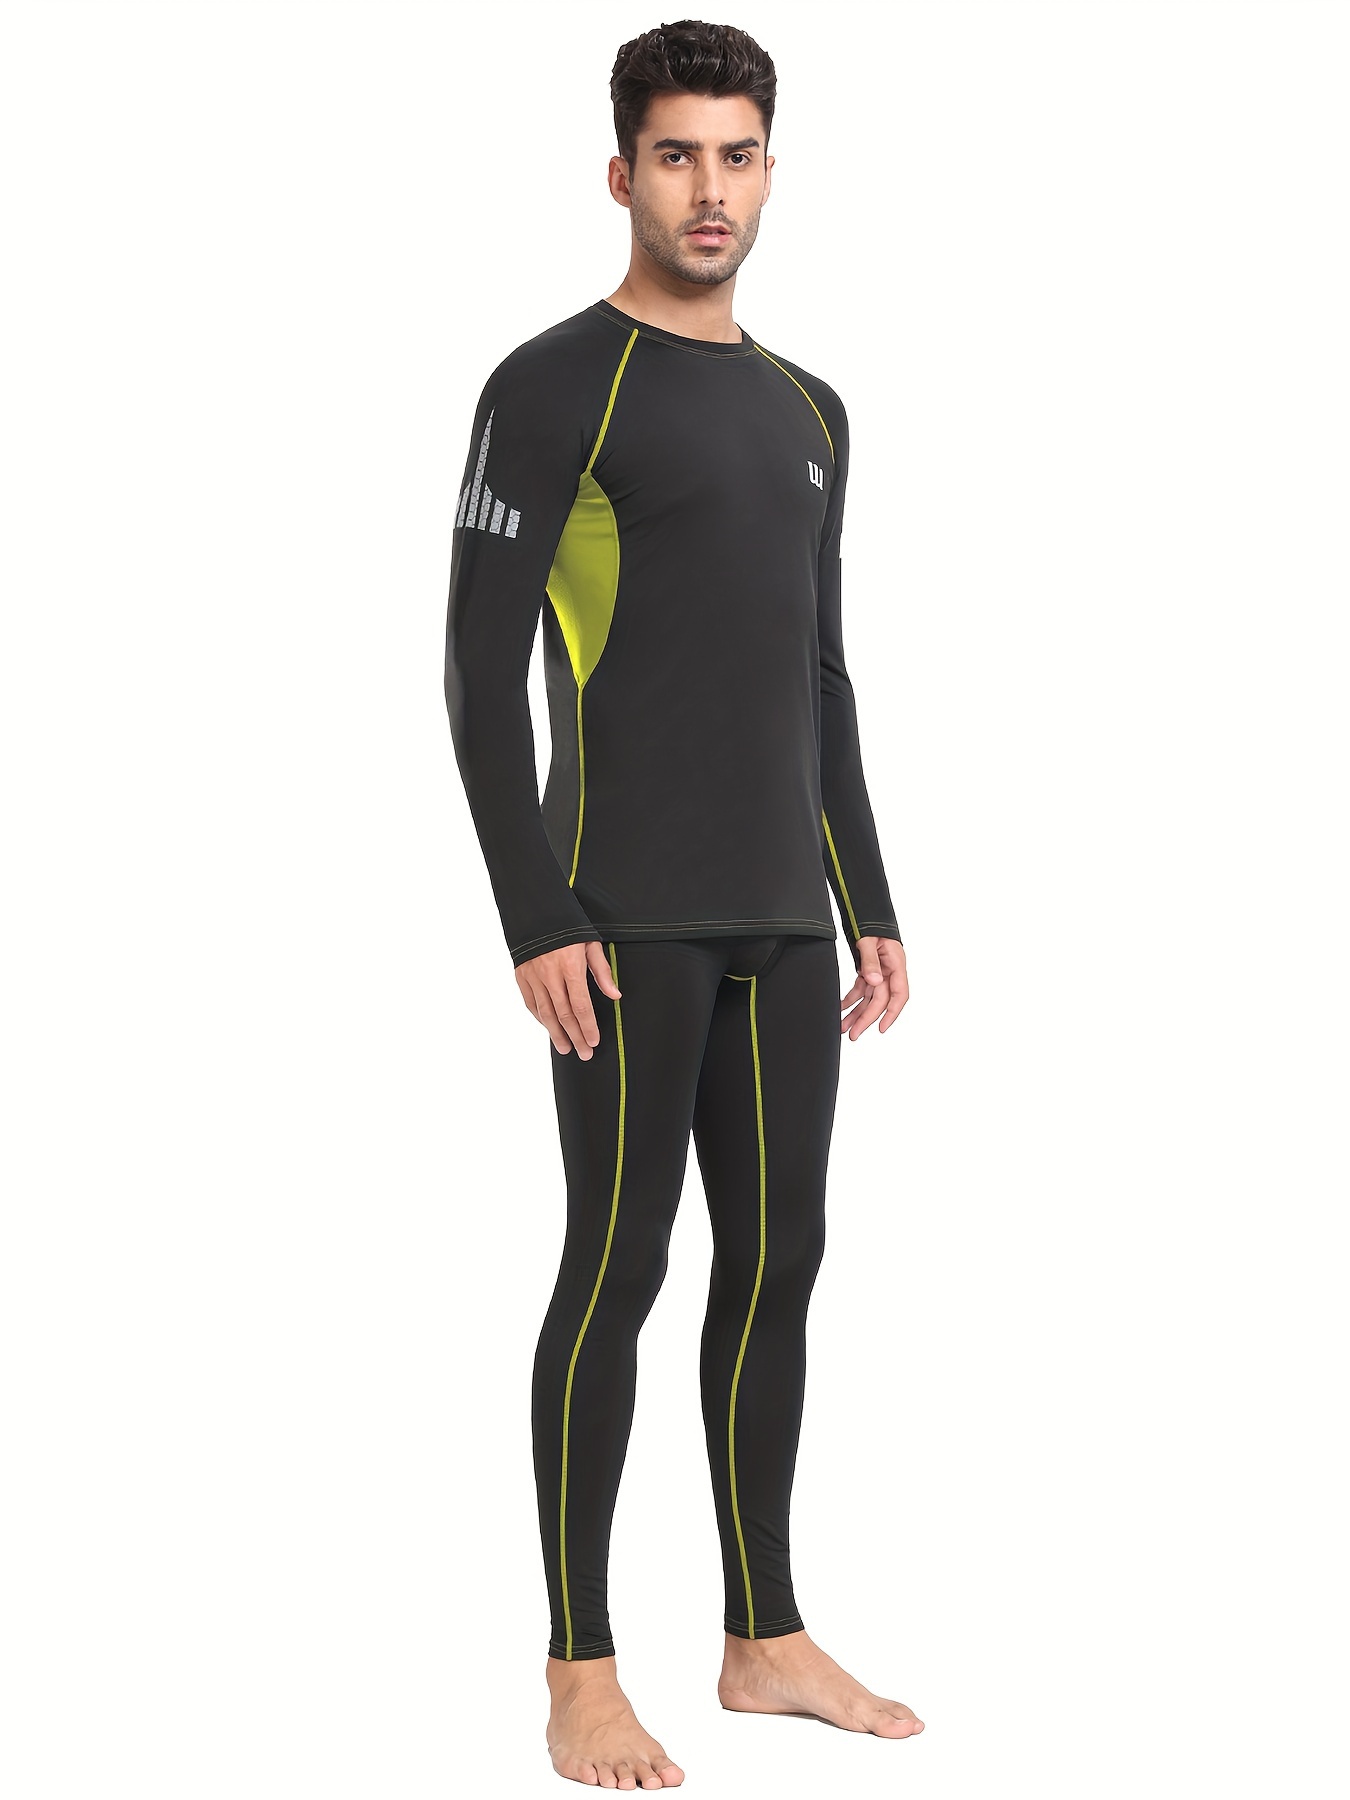 Thermal Underwear Set for Men Light Weight Long Johns Base layer for Skiing